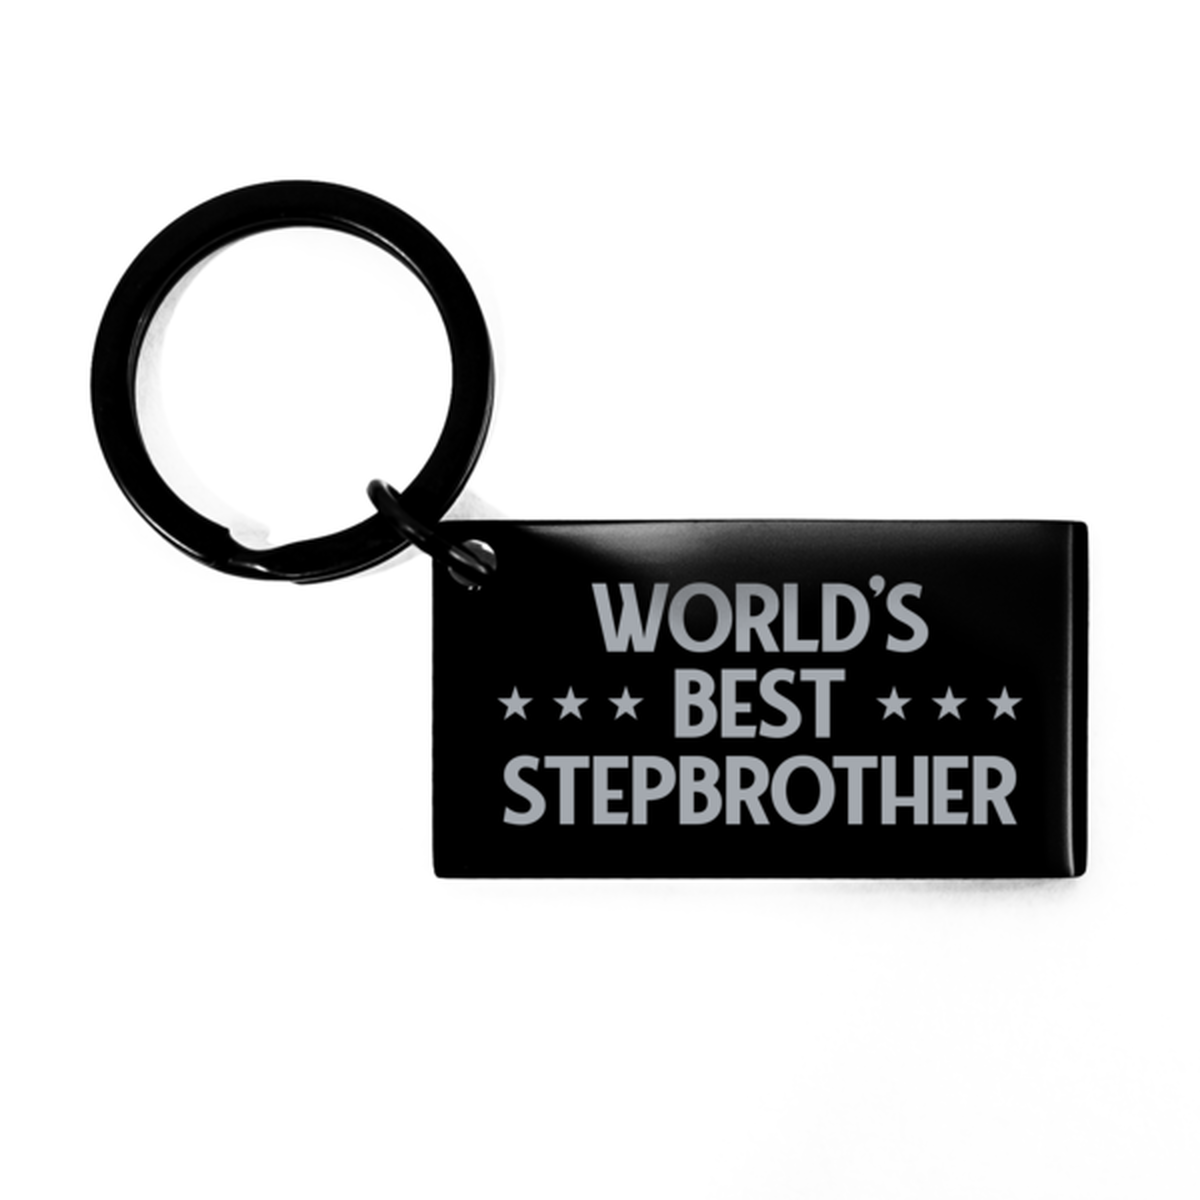 Worlds Best Stepbrother Gifts, Funny Black Engraved Keychain For Stepbrother, Birthday Presents For Men